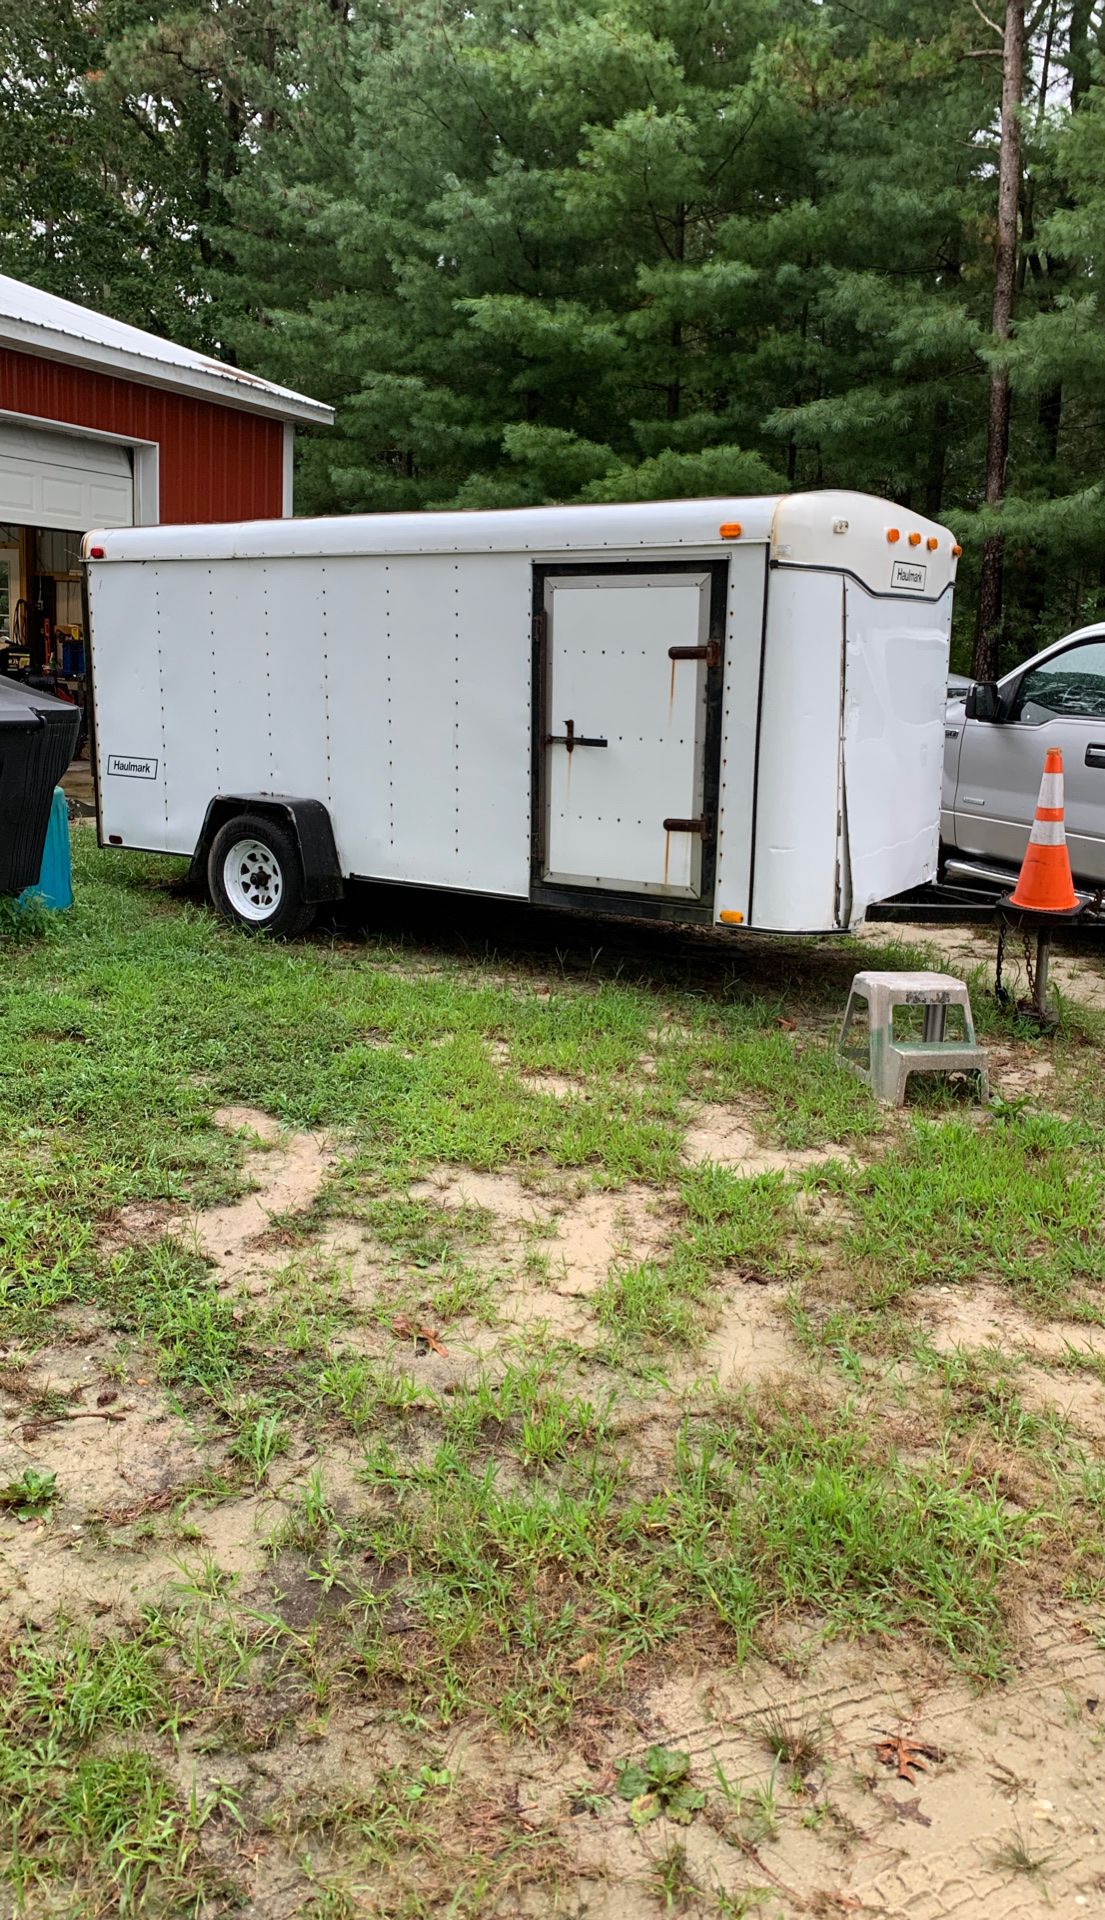 Enclosed trailer for sale 14 foot the price is firm !!!!!!